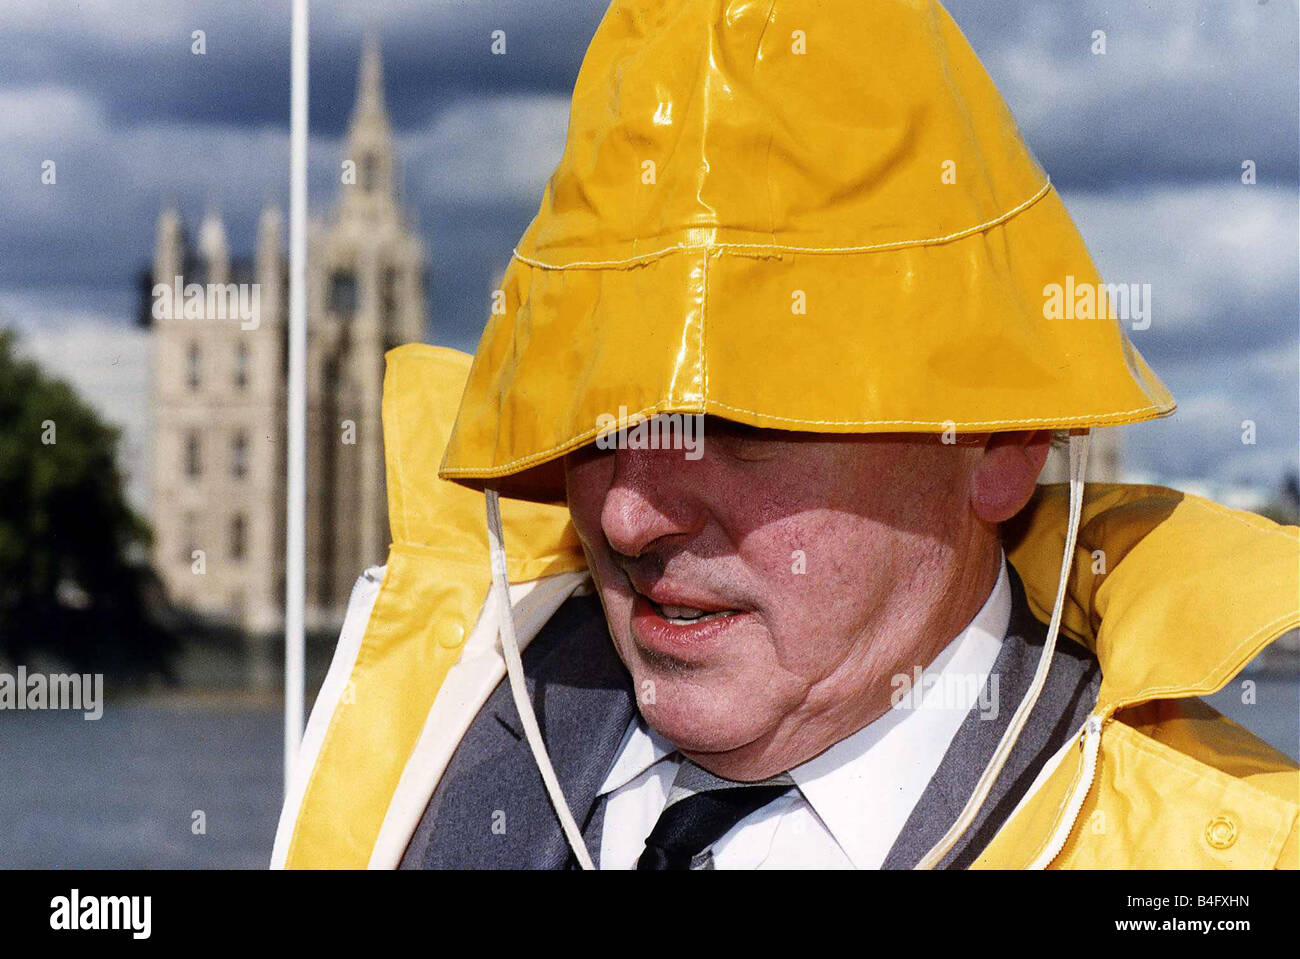 George Cole Actor in yellow souwester Mirrorpix Stock Photo